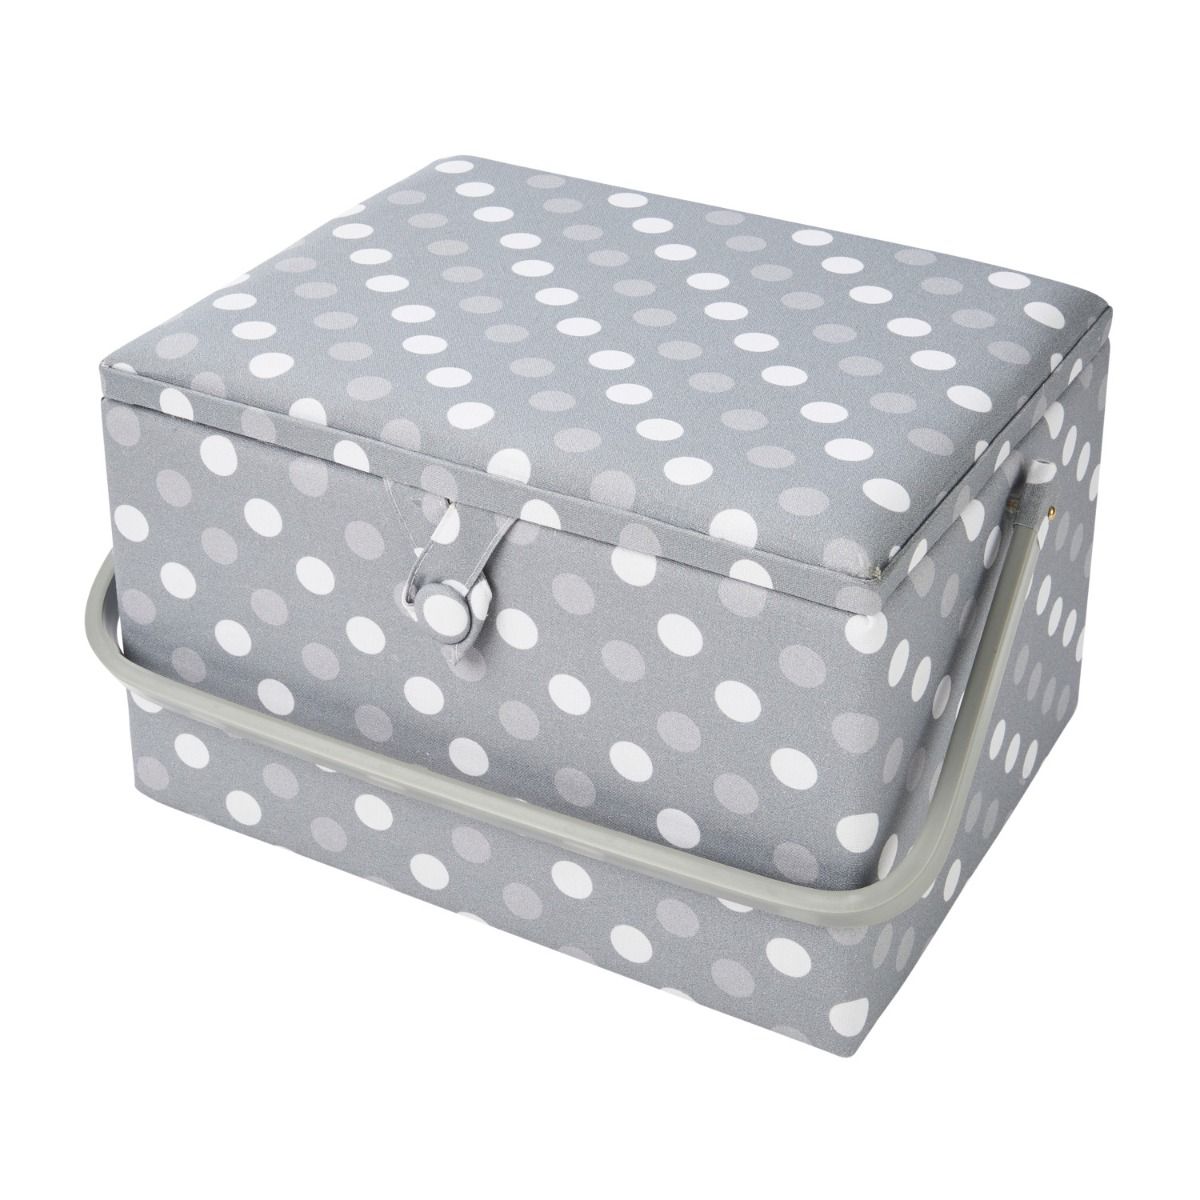 large sewing basket with compartments